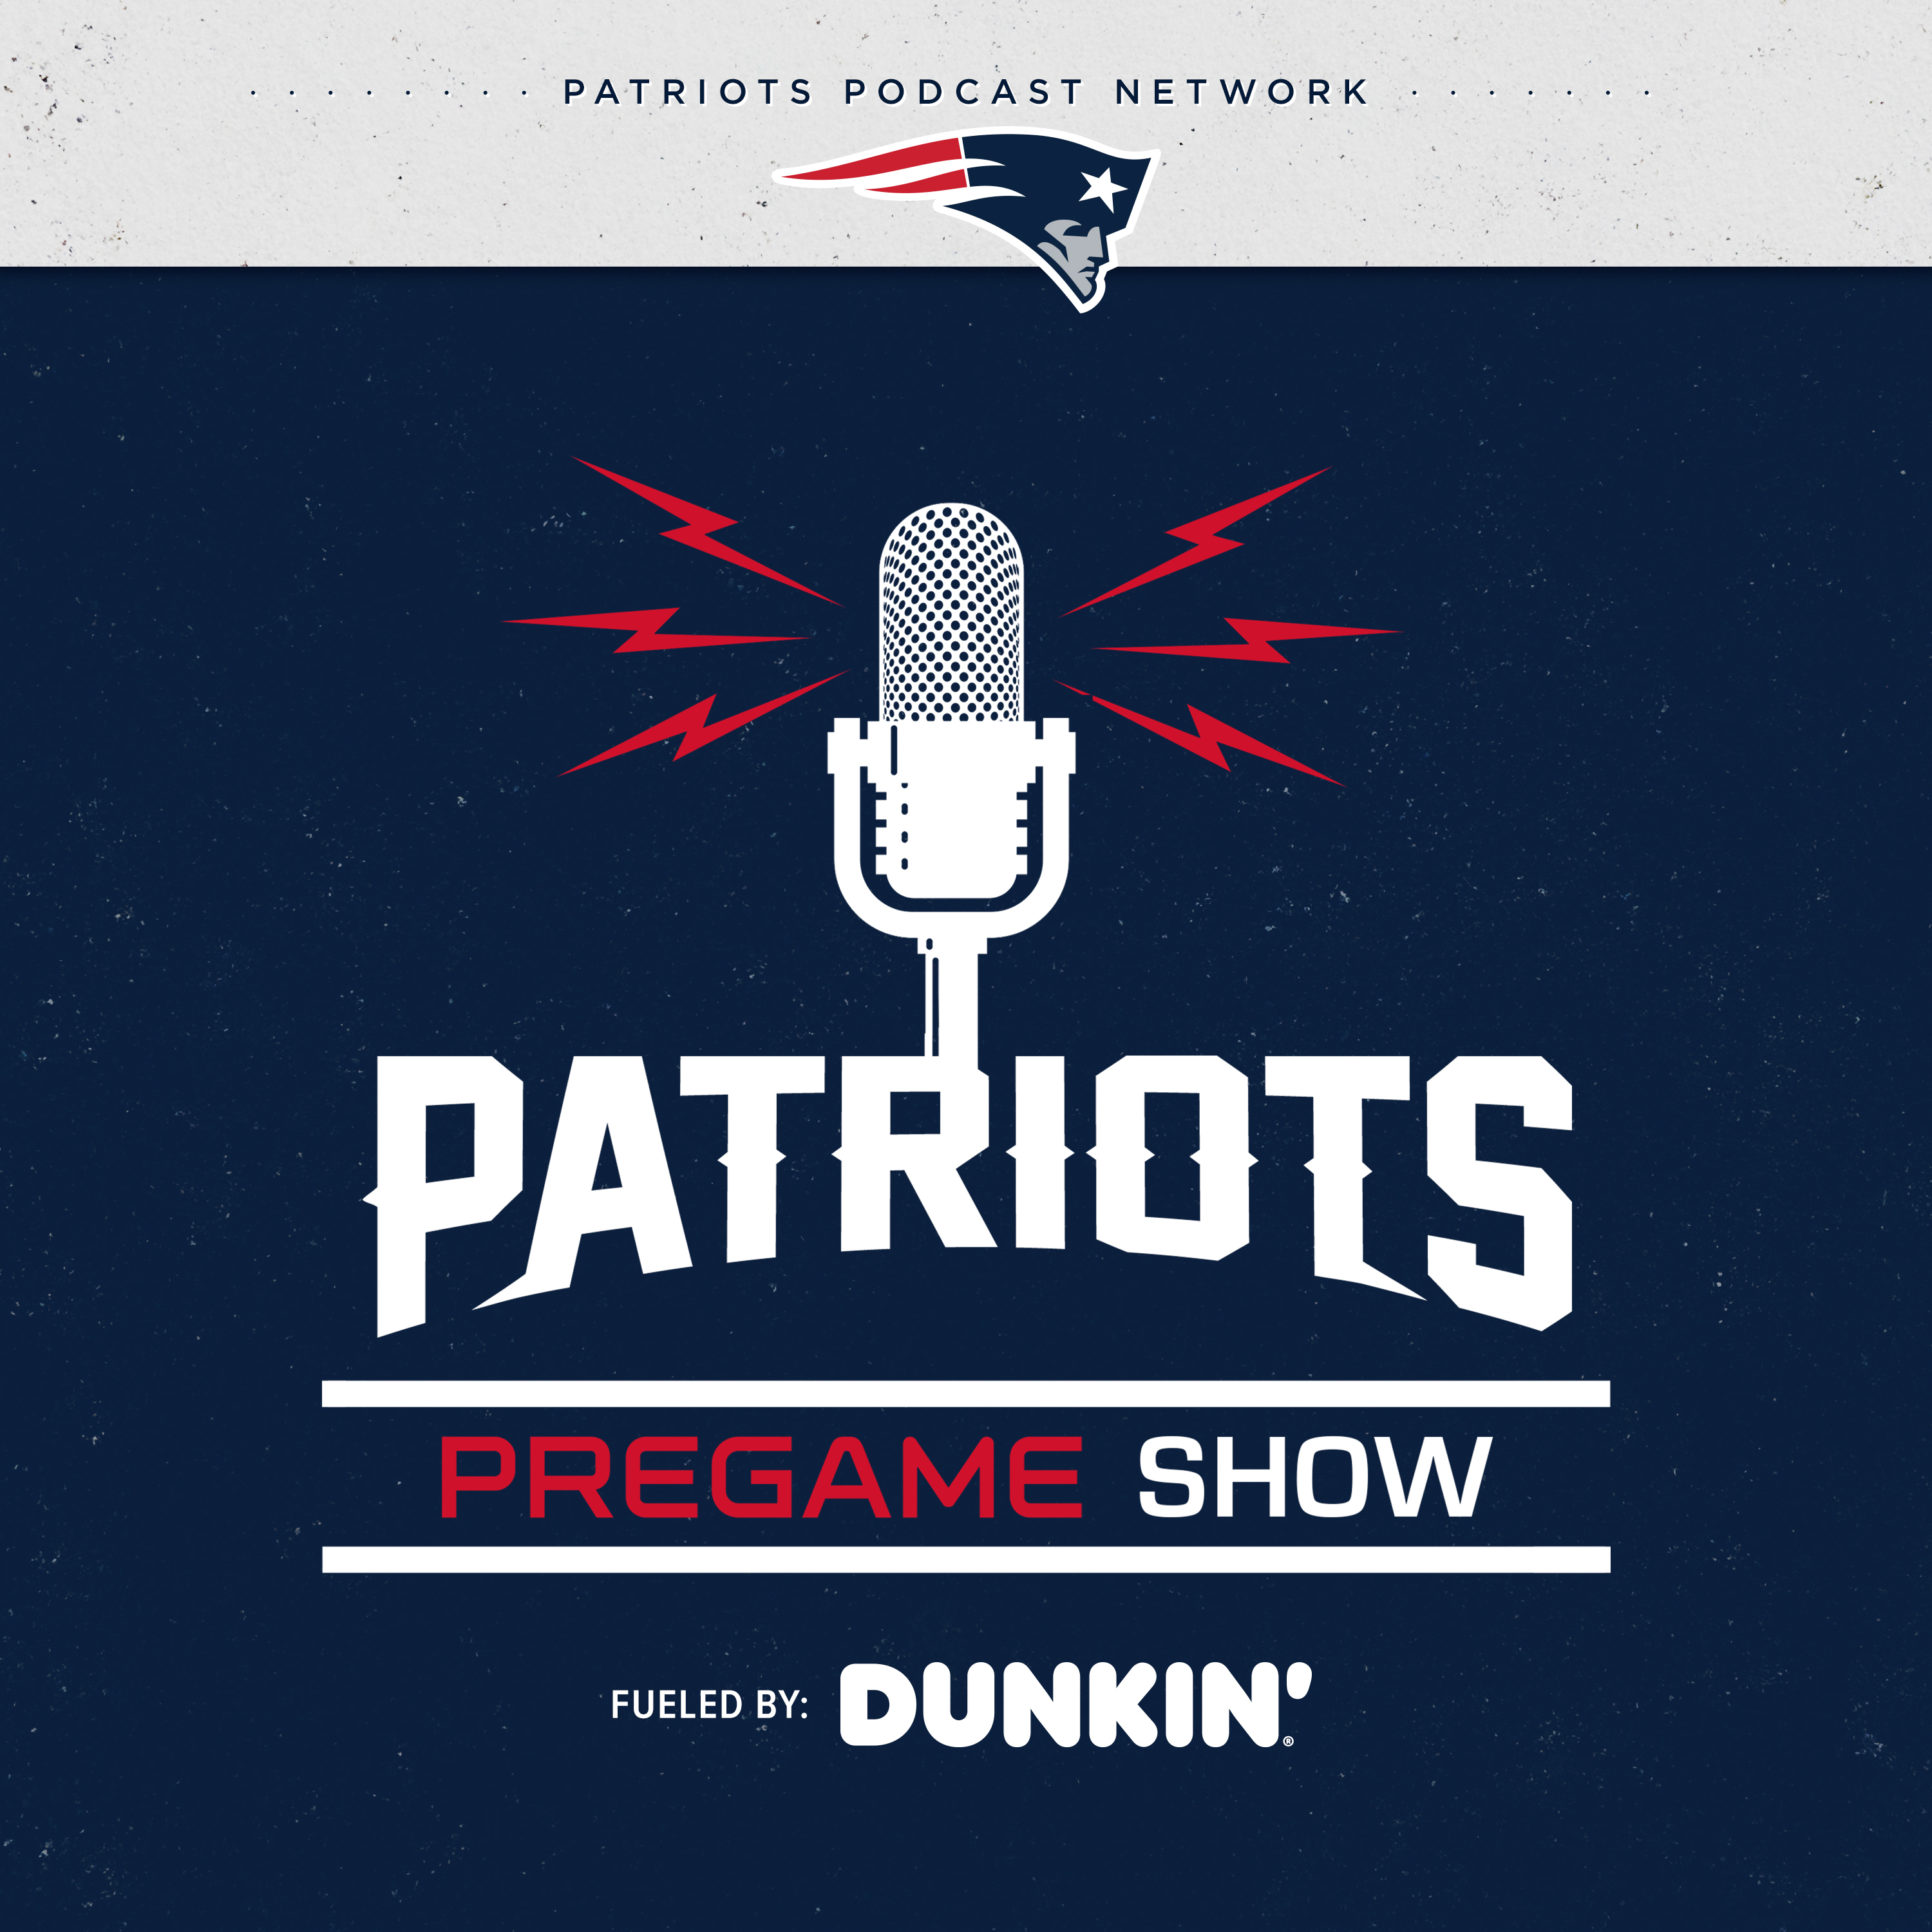 Patriots Pregame Show 10/31: Previewing the Chargers